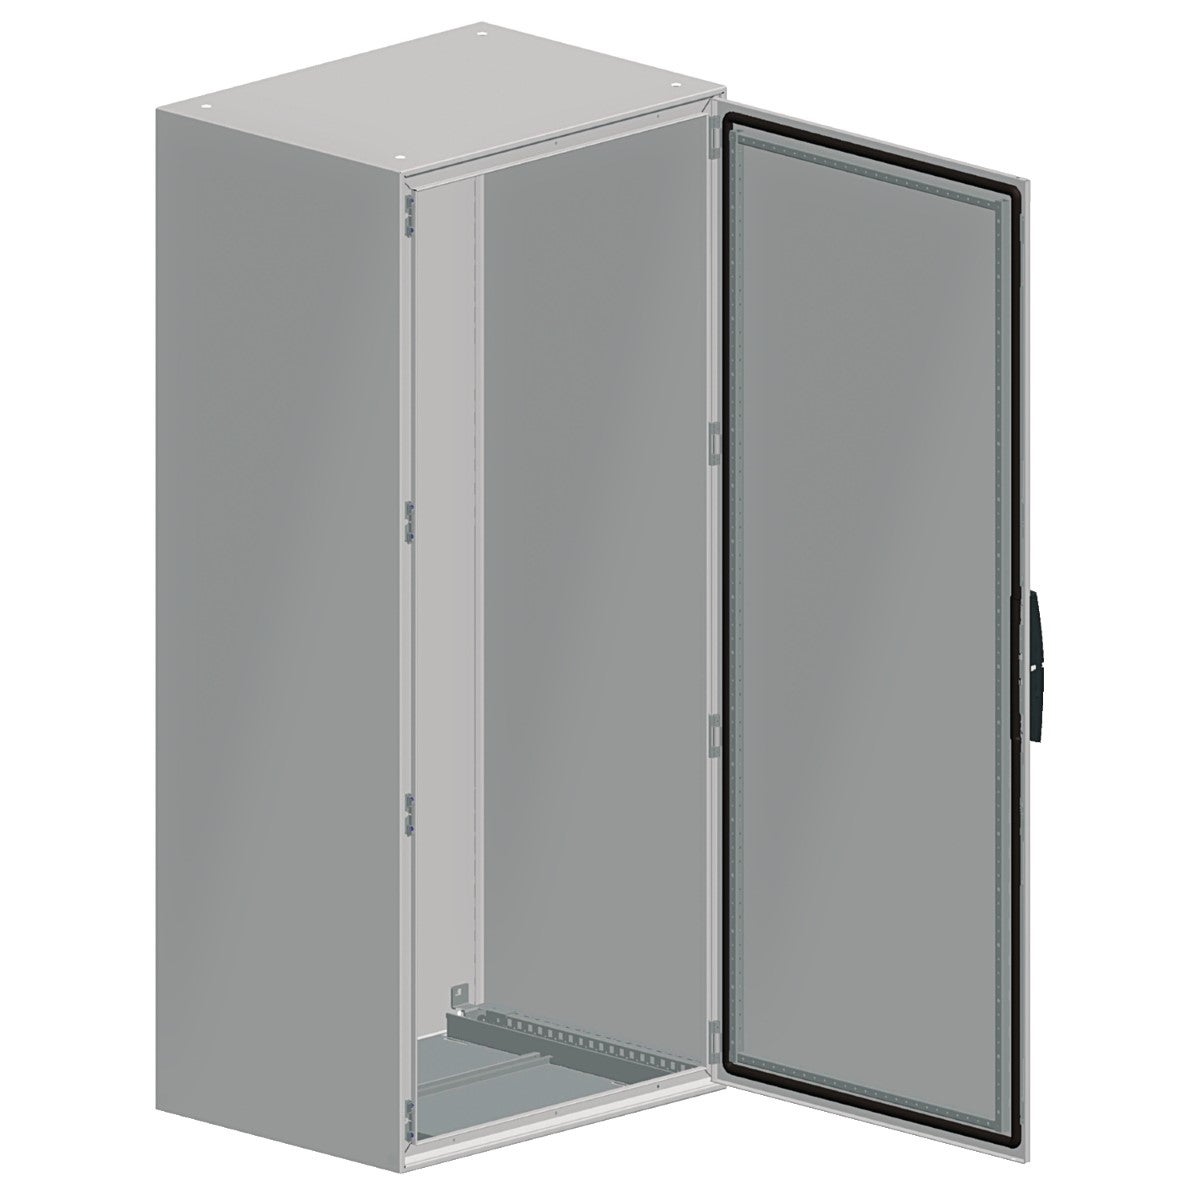 Spacial SM compact enclosure with mounting plate - 2000x800x400 mm